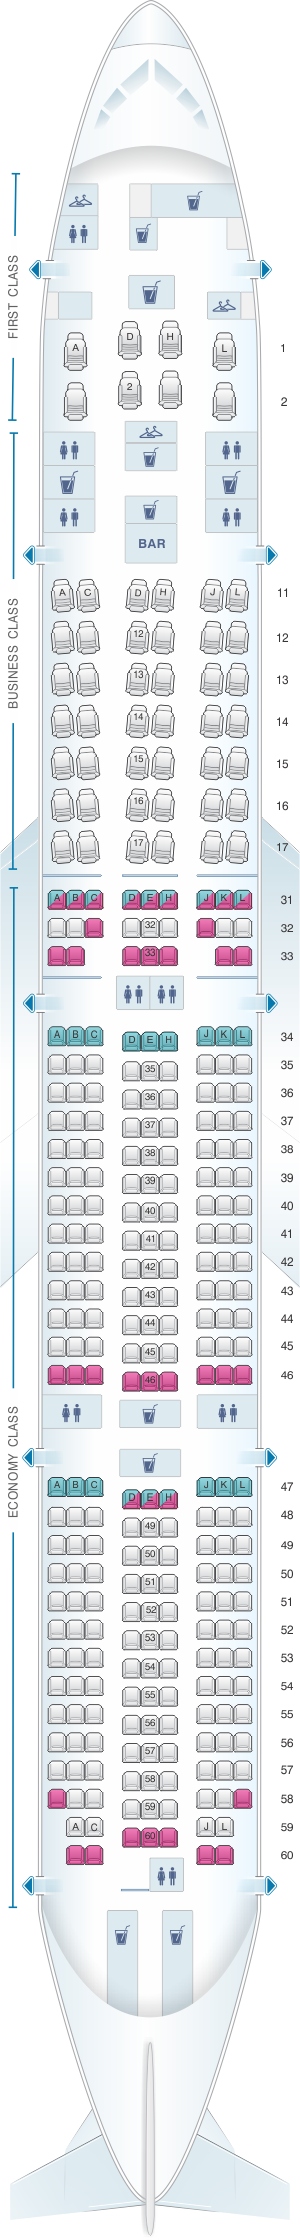 Seat map for Air China Boeing B777 300ER (311PAX)